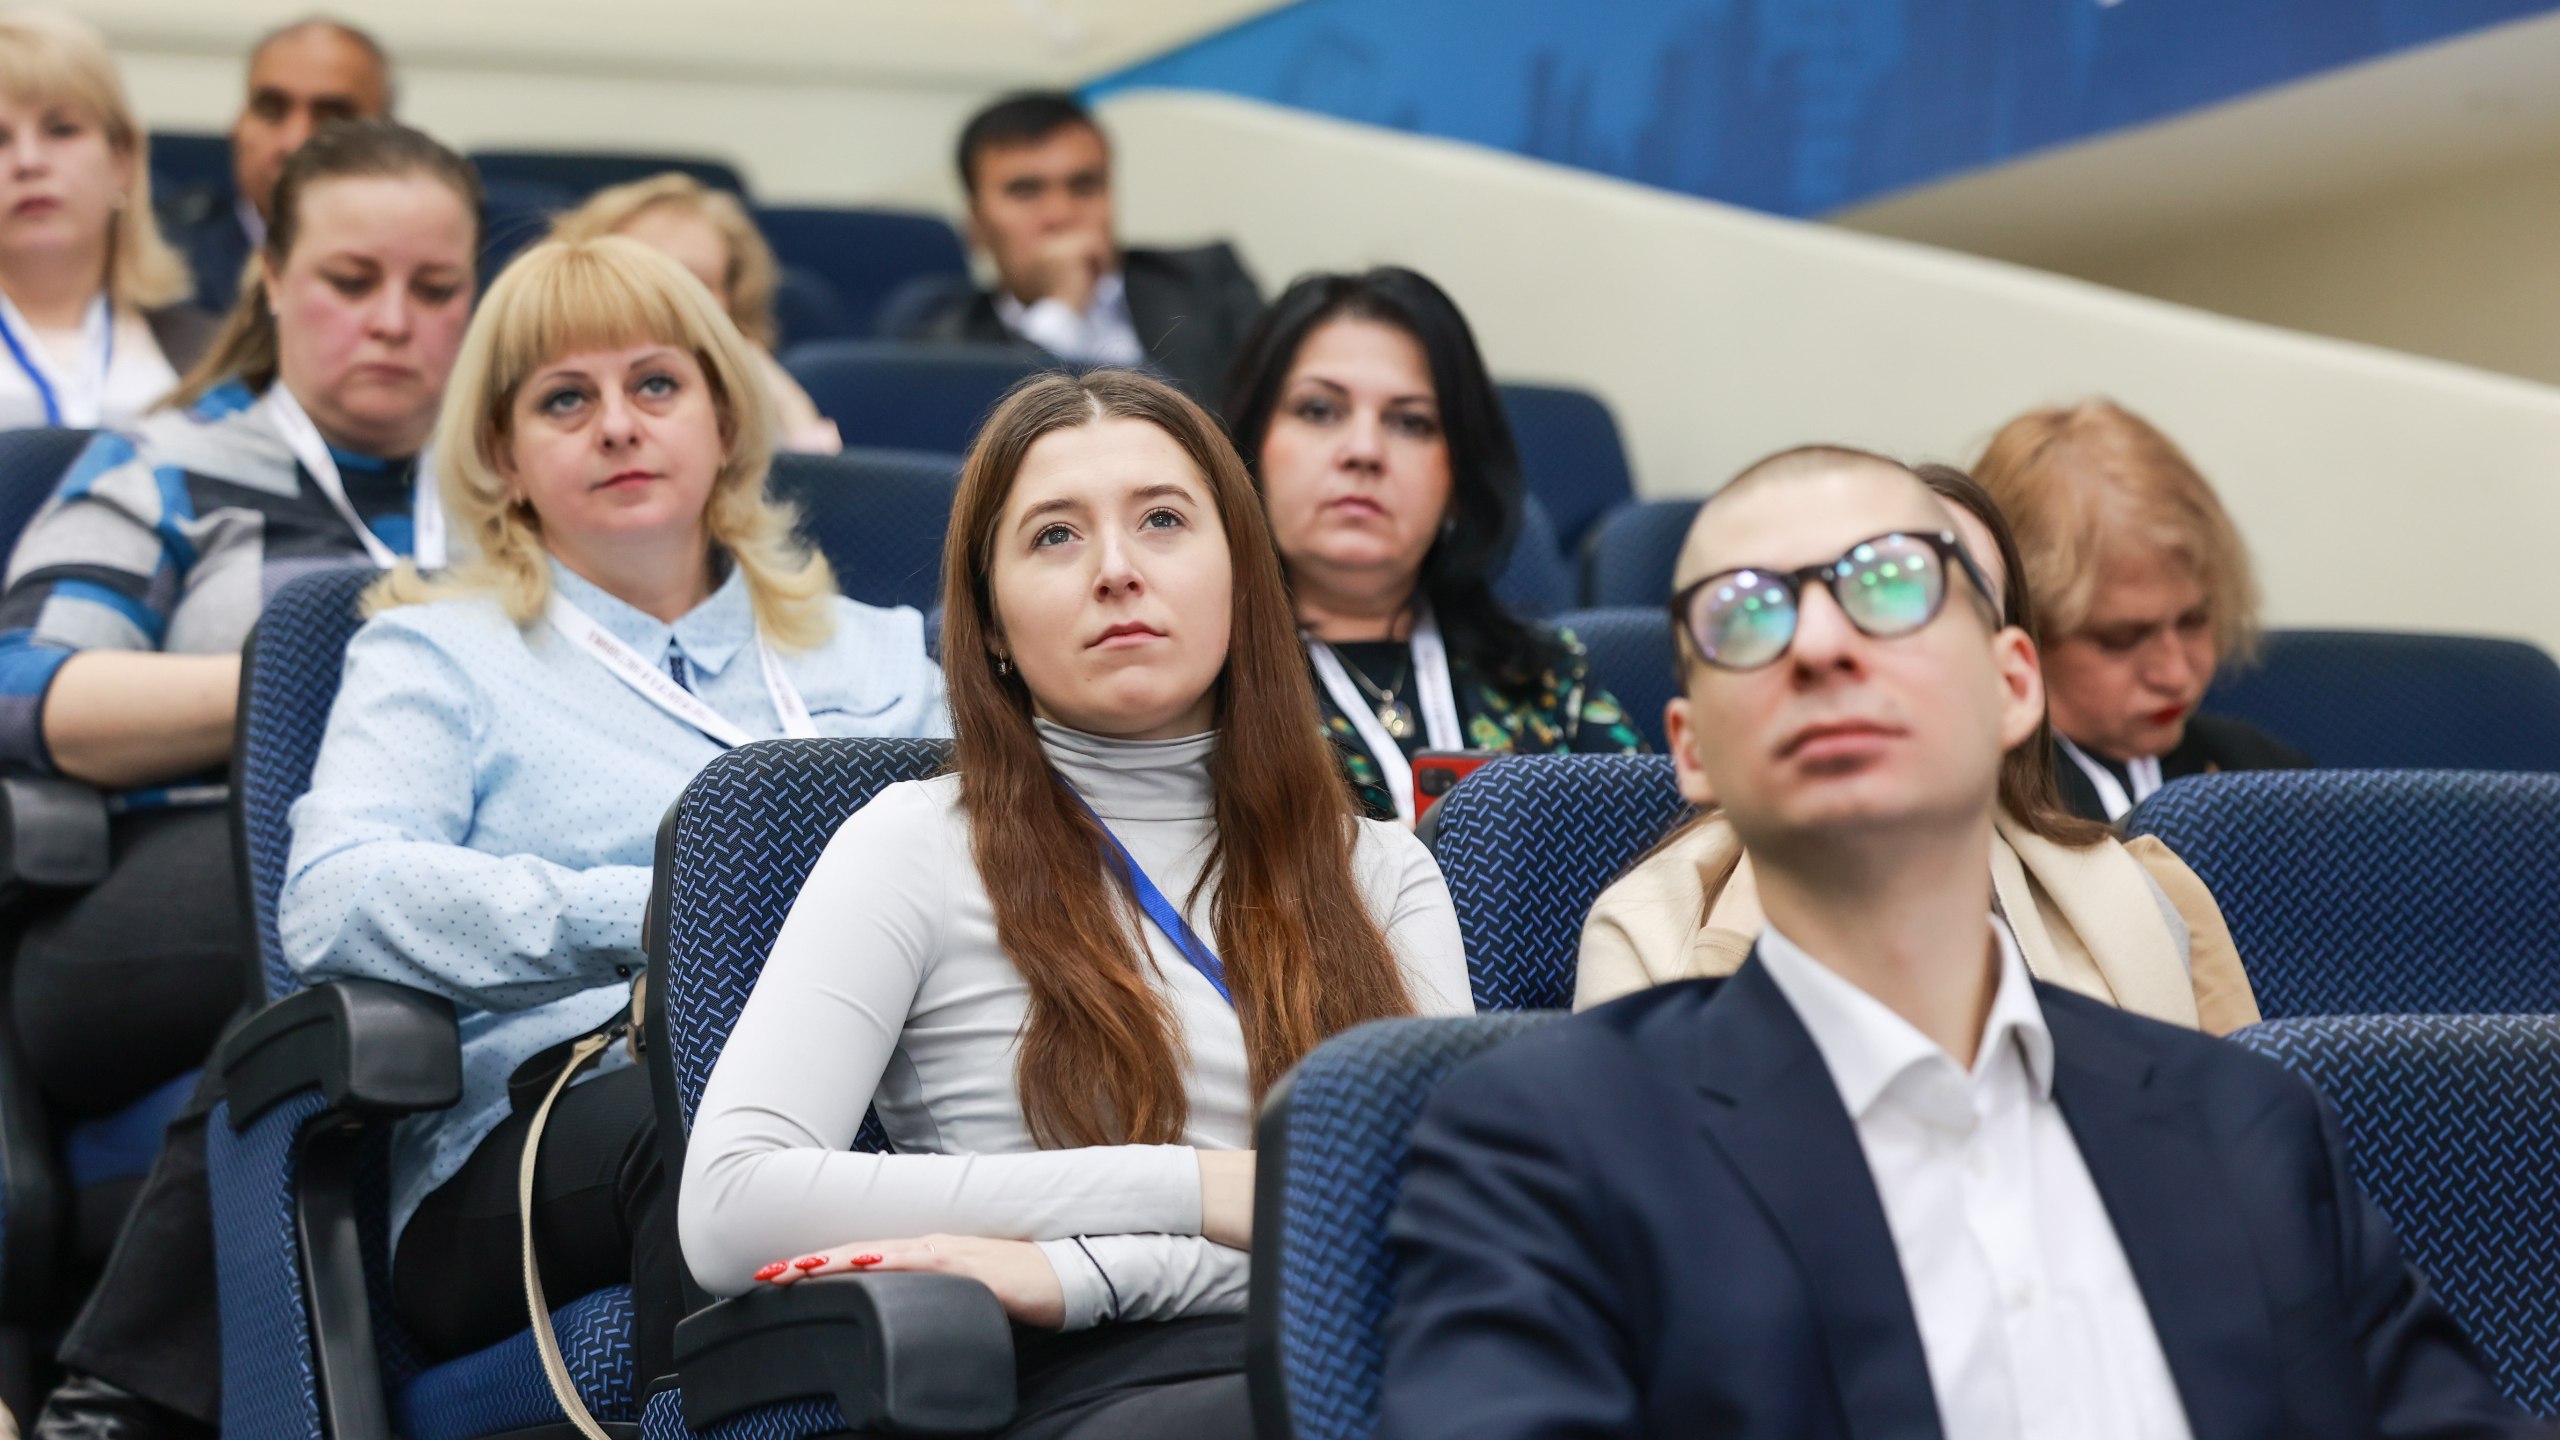 4,000 educators from 11 countries took part in Maths Congress in Moscow